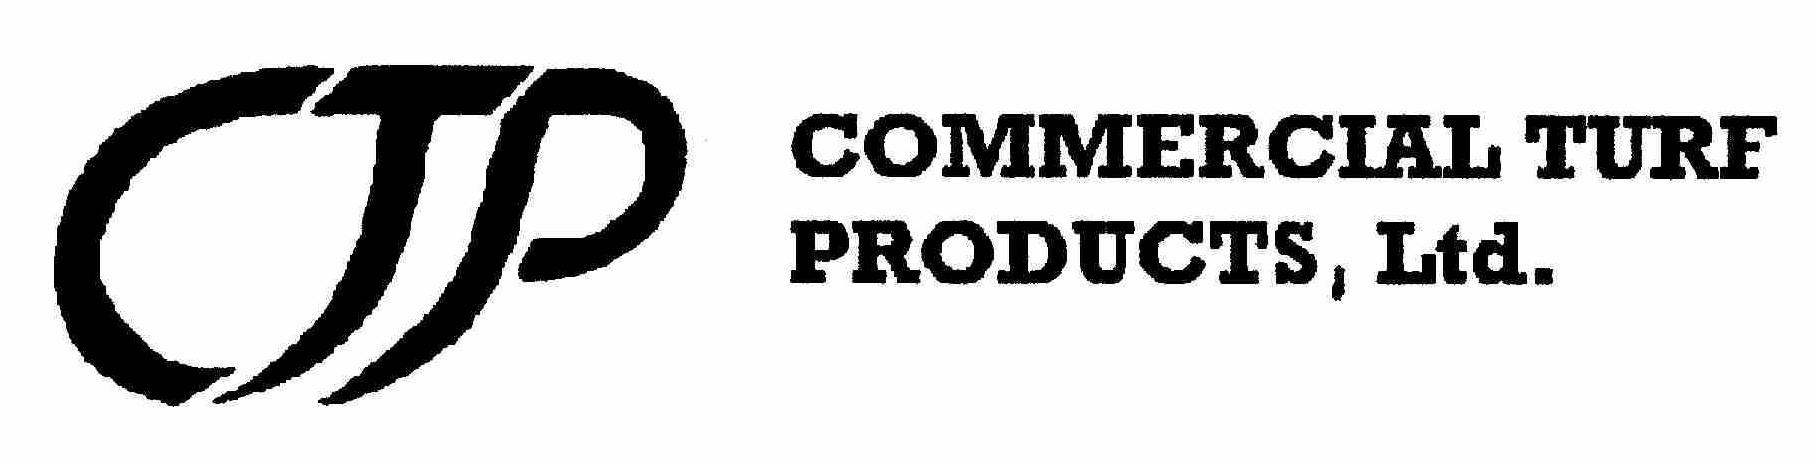  CTP COMMERCIAL TURF PRODUCTS, LTD.